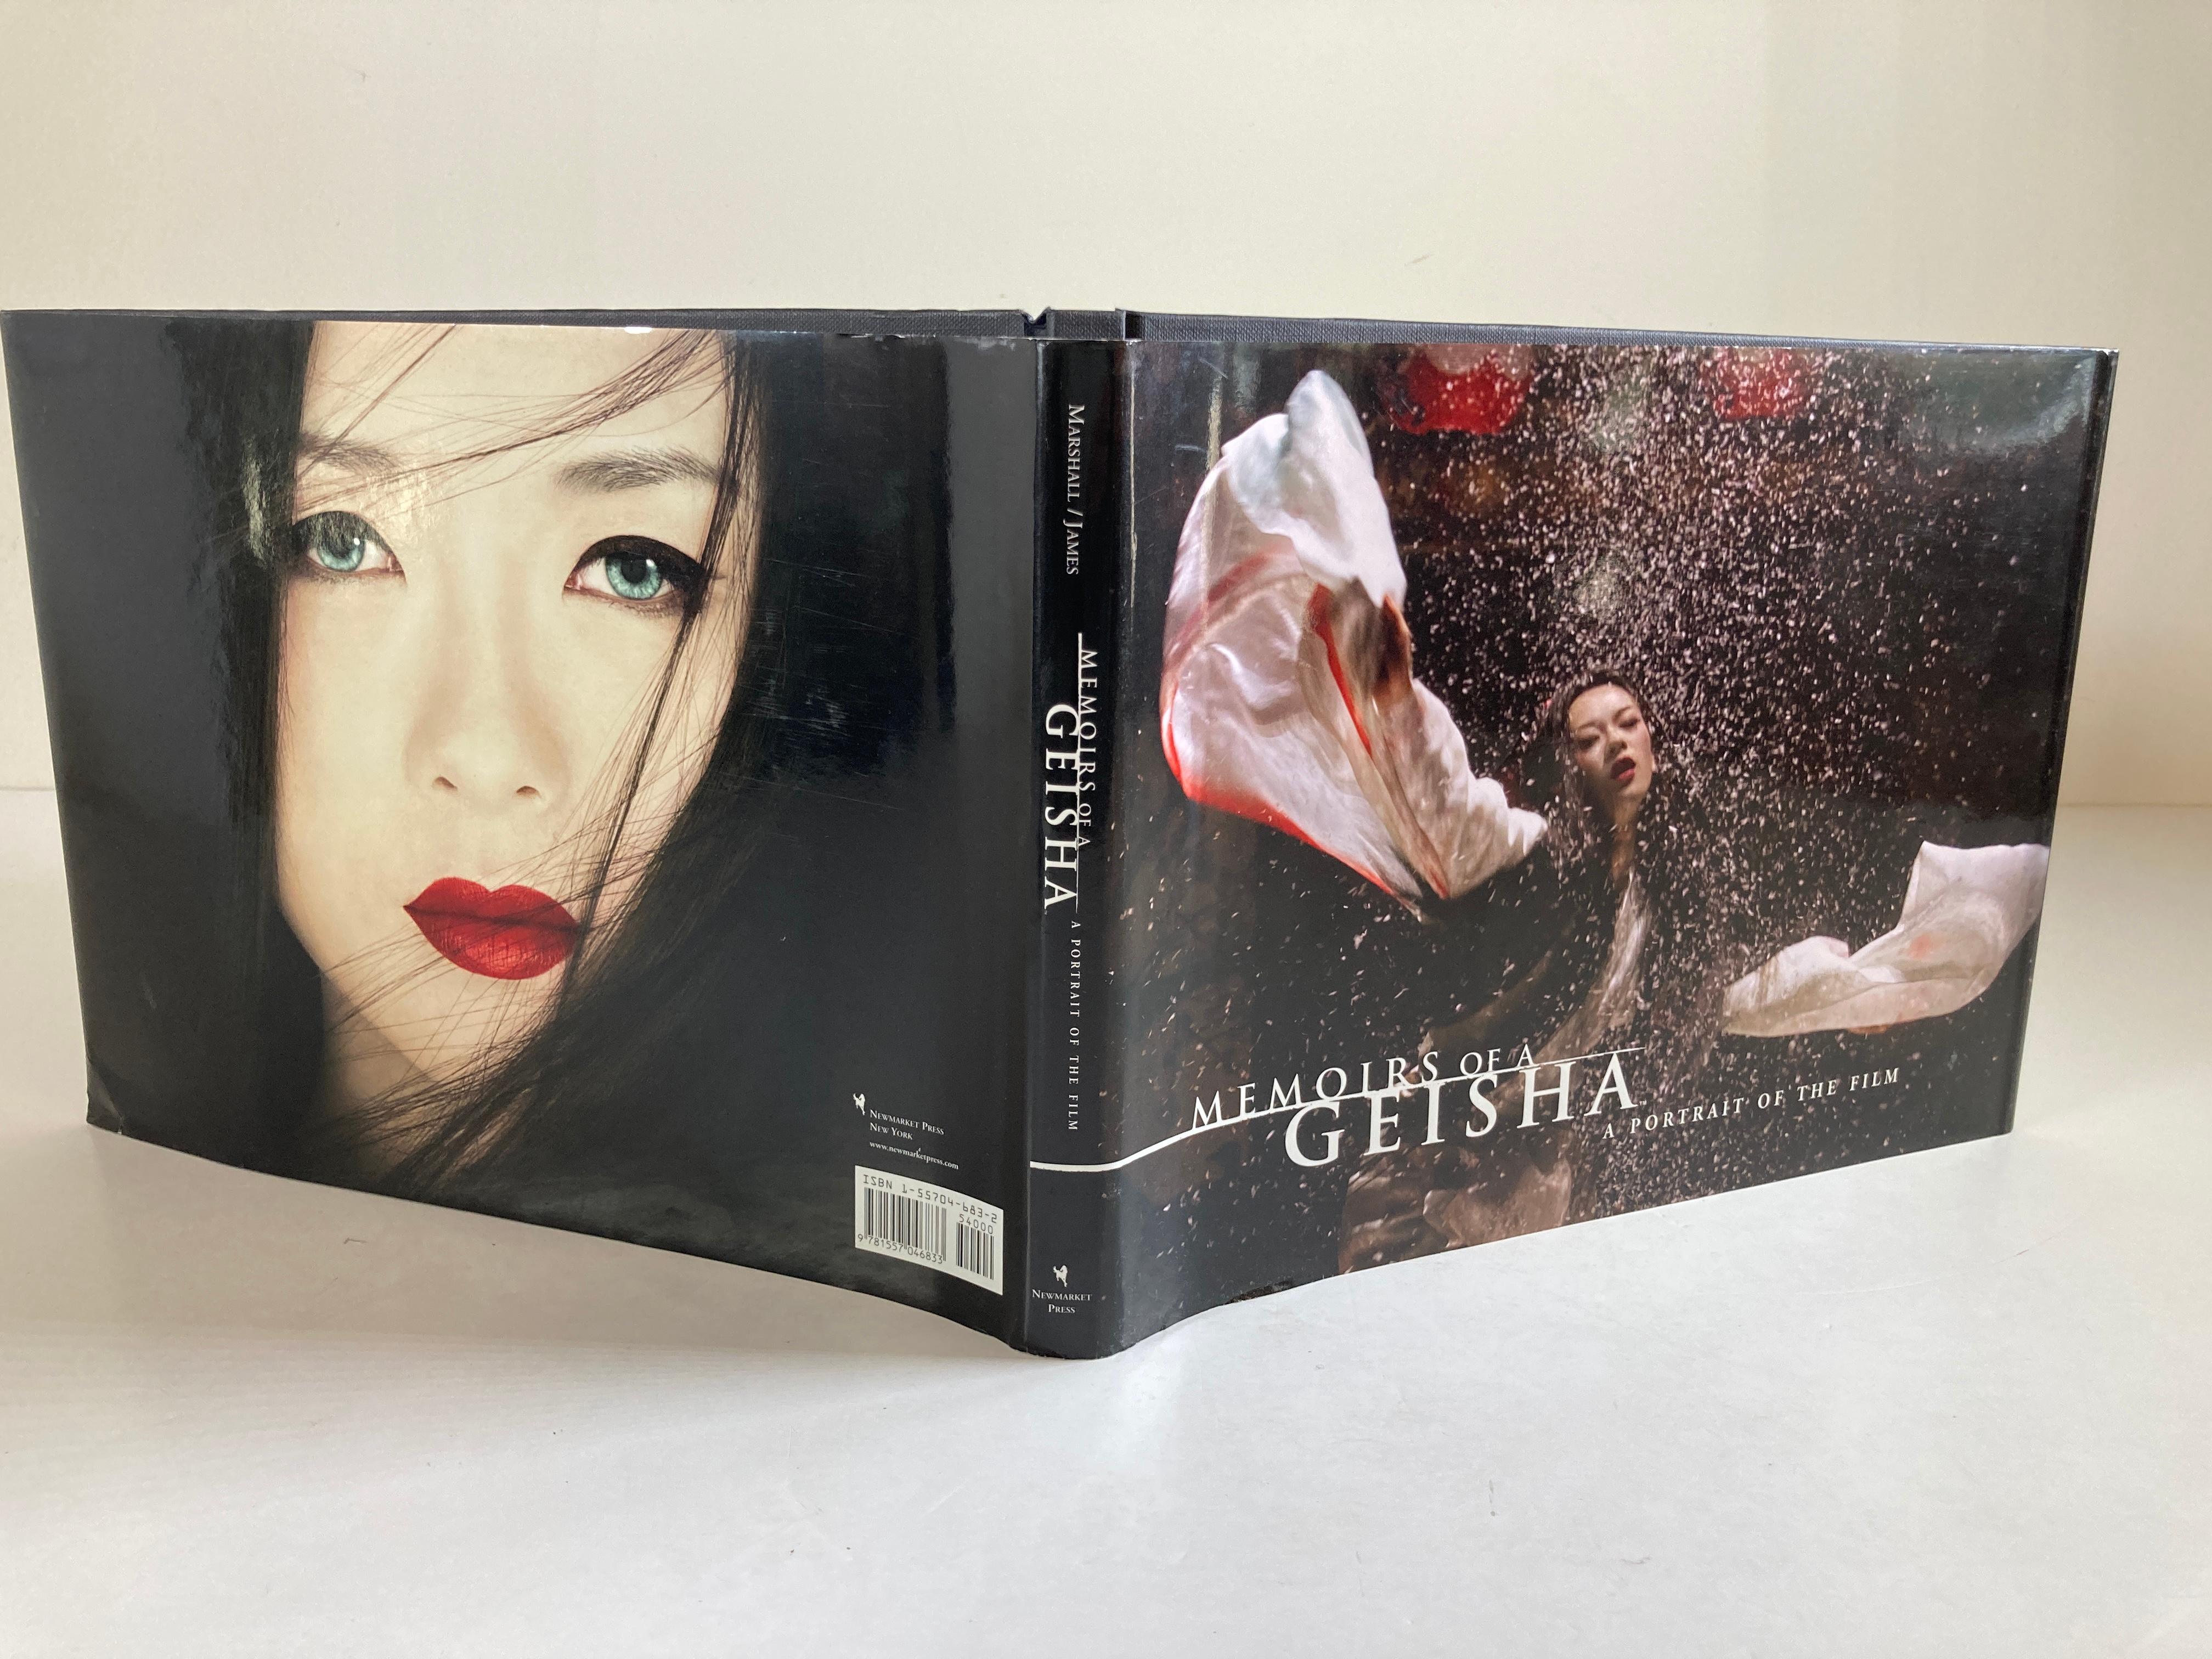 Japanese Memoirs of a Geisha A Portrait of the Film By Peggy Mulloy 2005 Hardcover Book For Sale